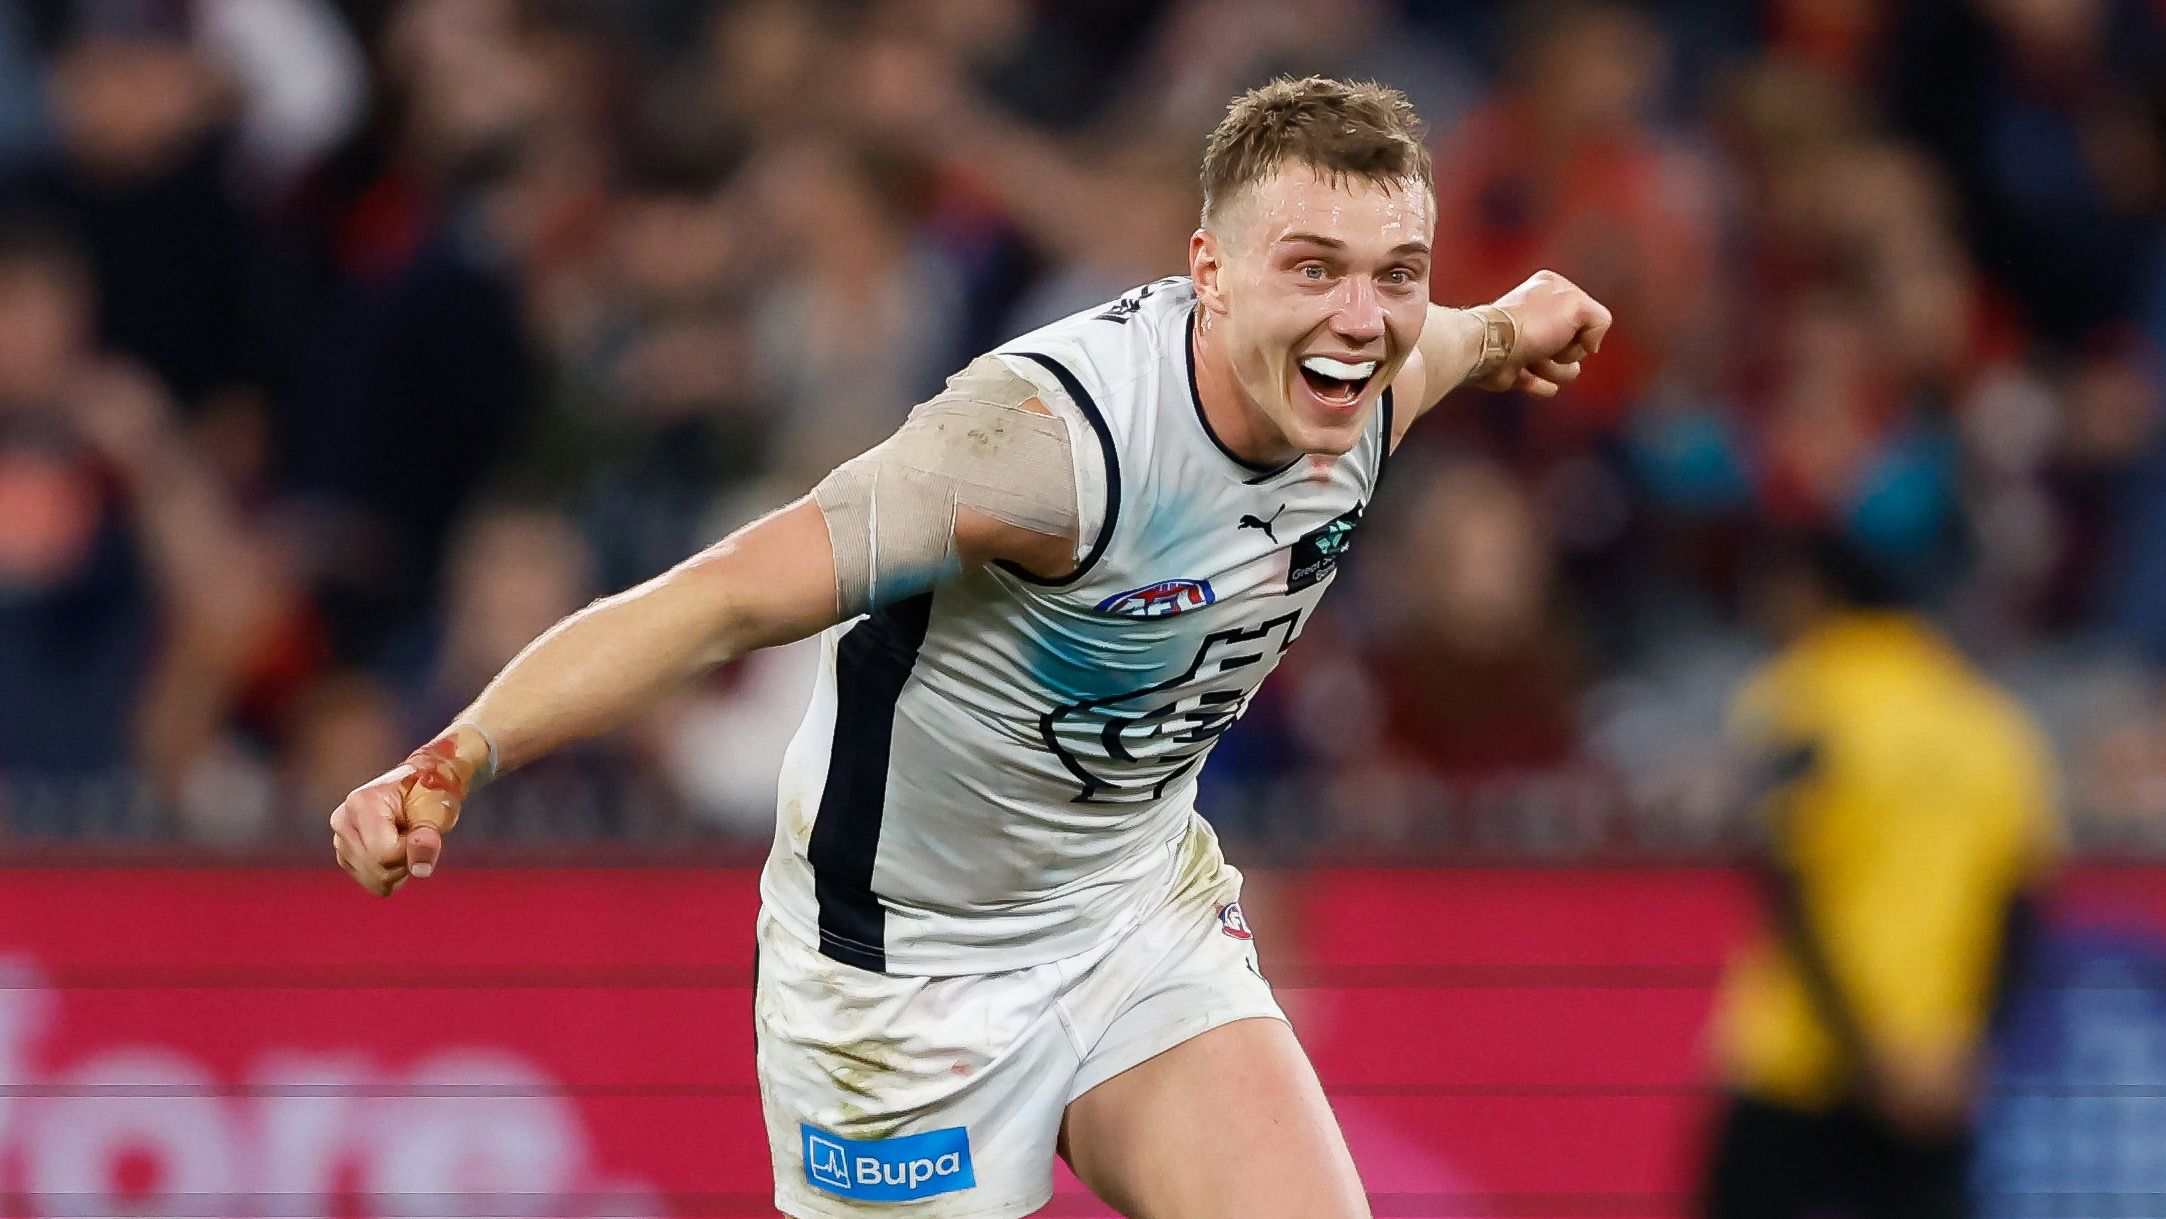 MELBOURNE, AUSTRALIA - SEPTEMBER 15: Patrick Cripps of the Blues reacts after the siren during the 2023 AFL First Semi Final match between the Melbourne Demons and the Carlton Blues at Melbourne Cricket Ground on September 15, 2023 in Melbourne, Australia. (Photo by Dylan Burns/AFL Photos via Getty Images)